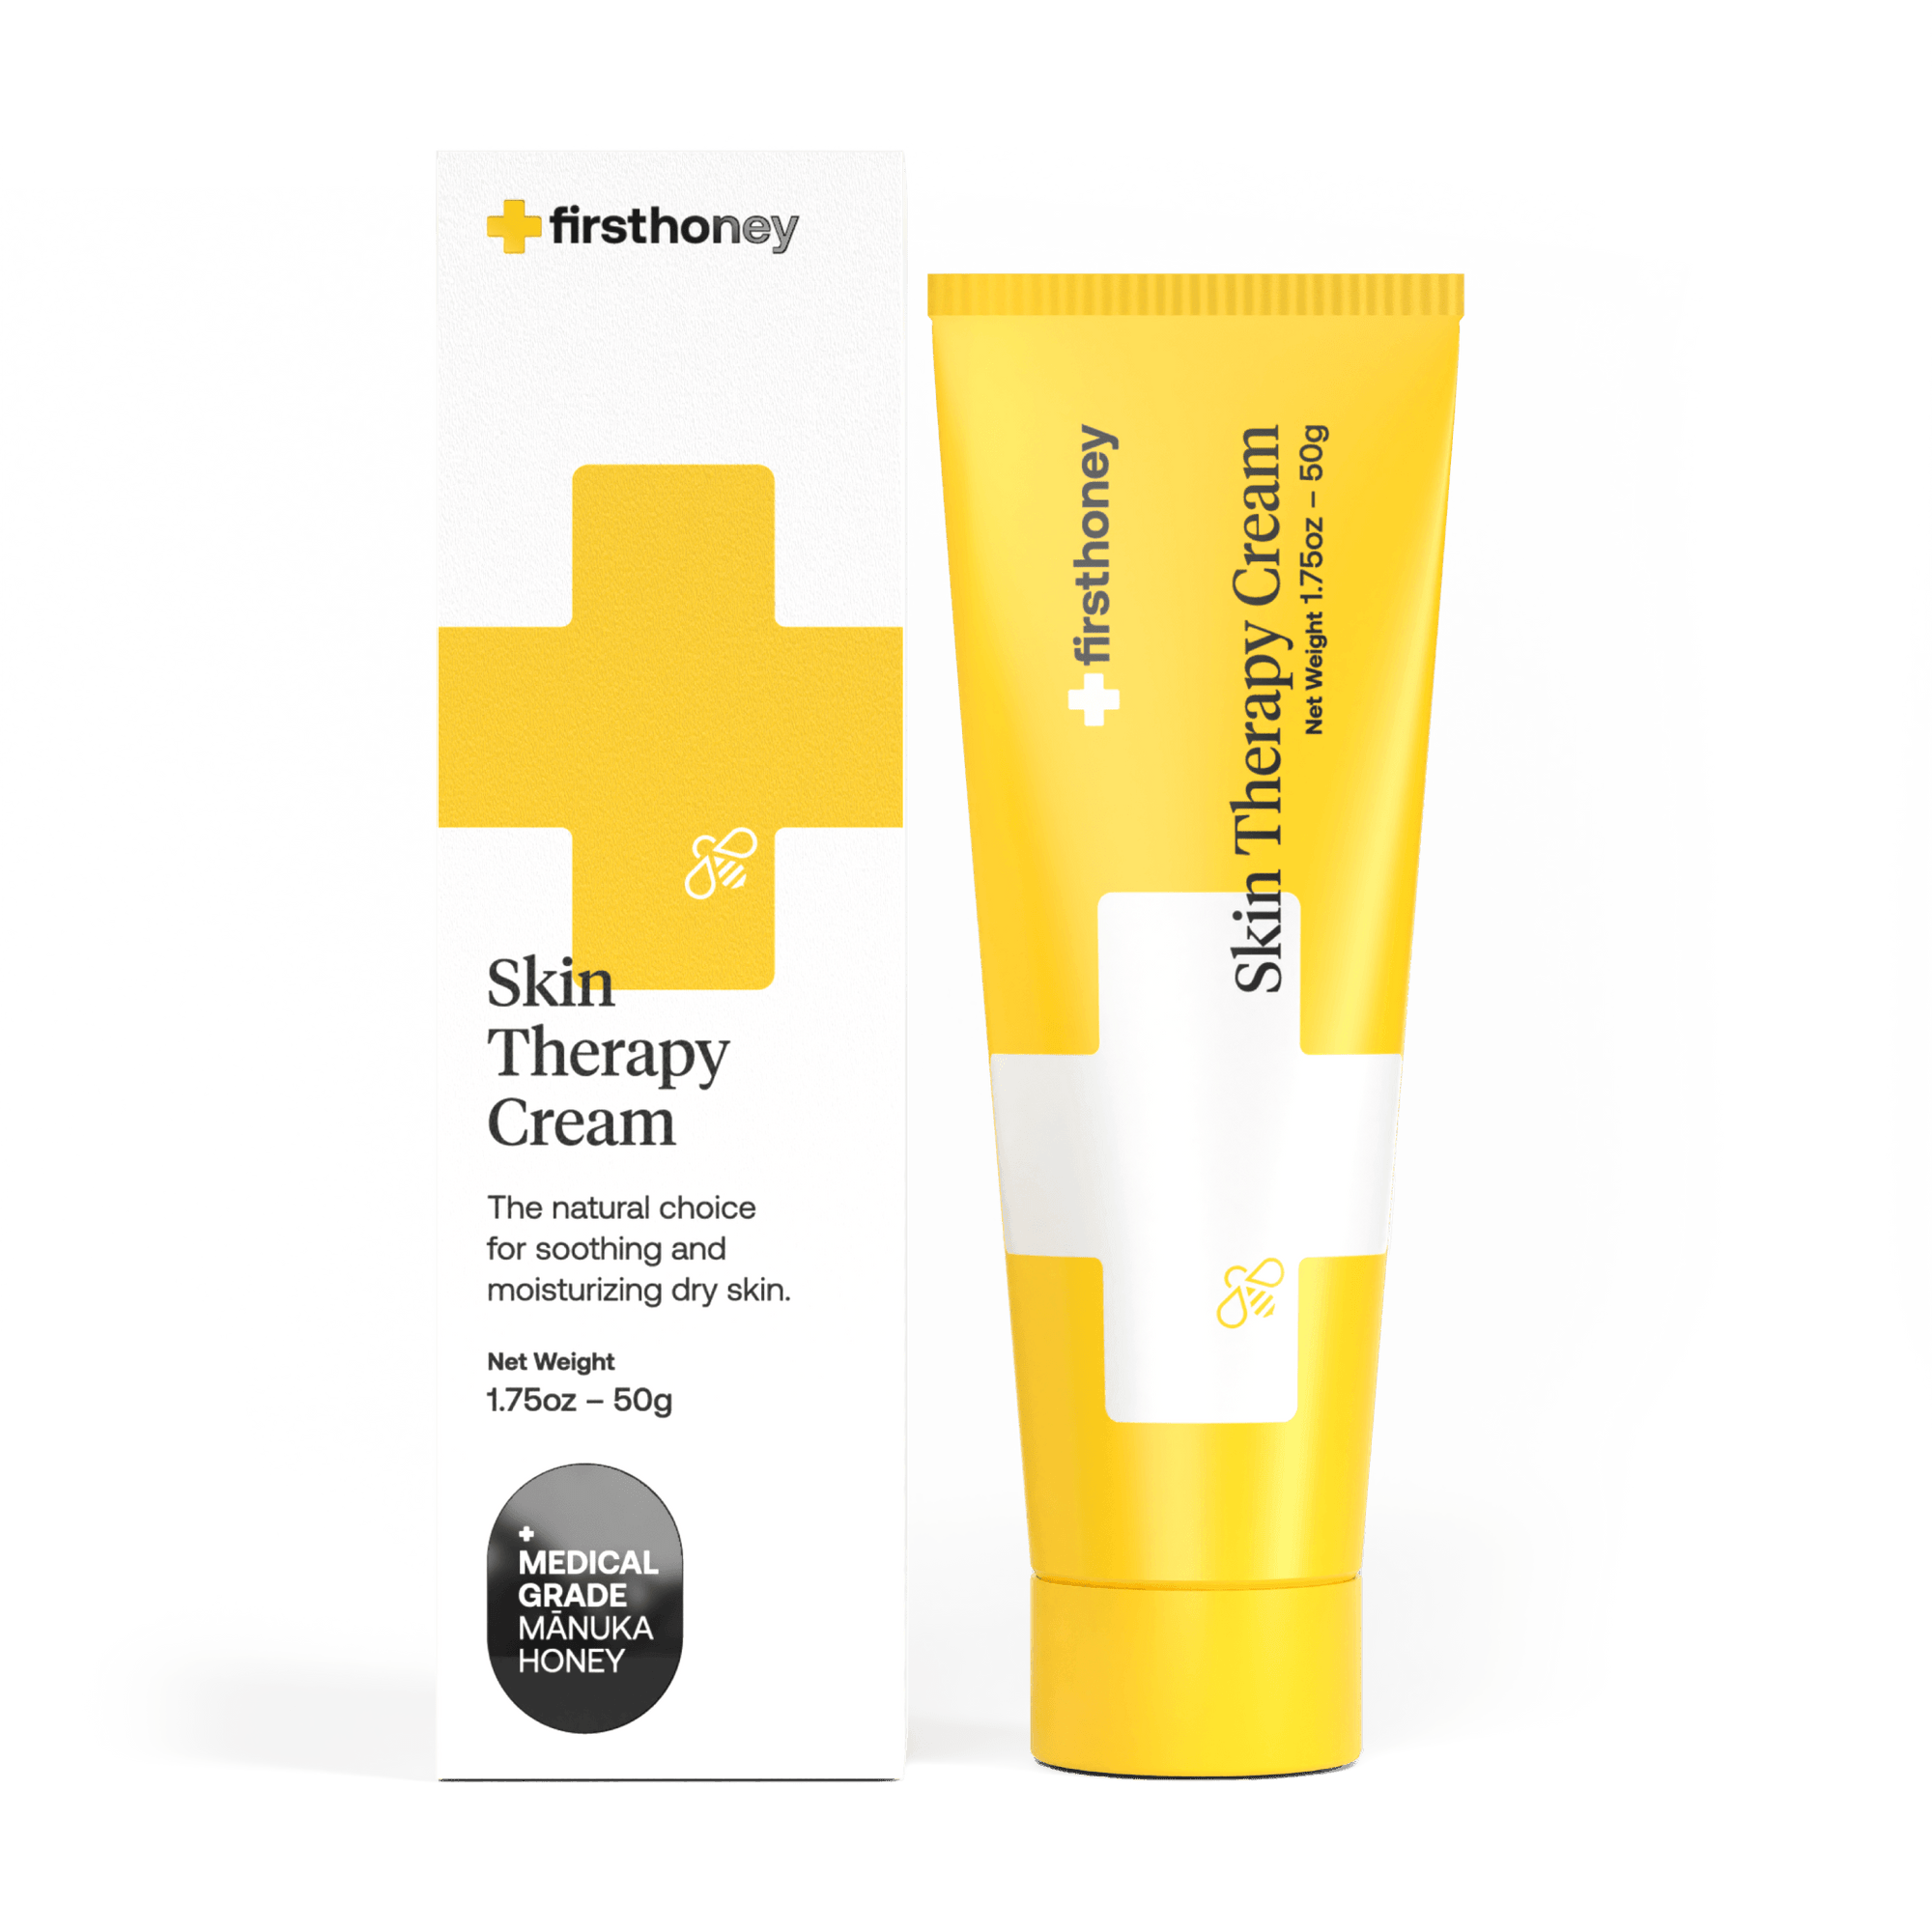  First Honey Skin Therapy Cream